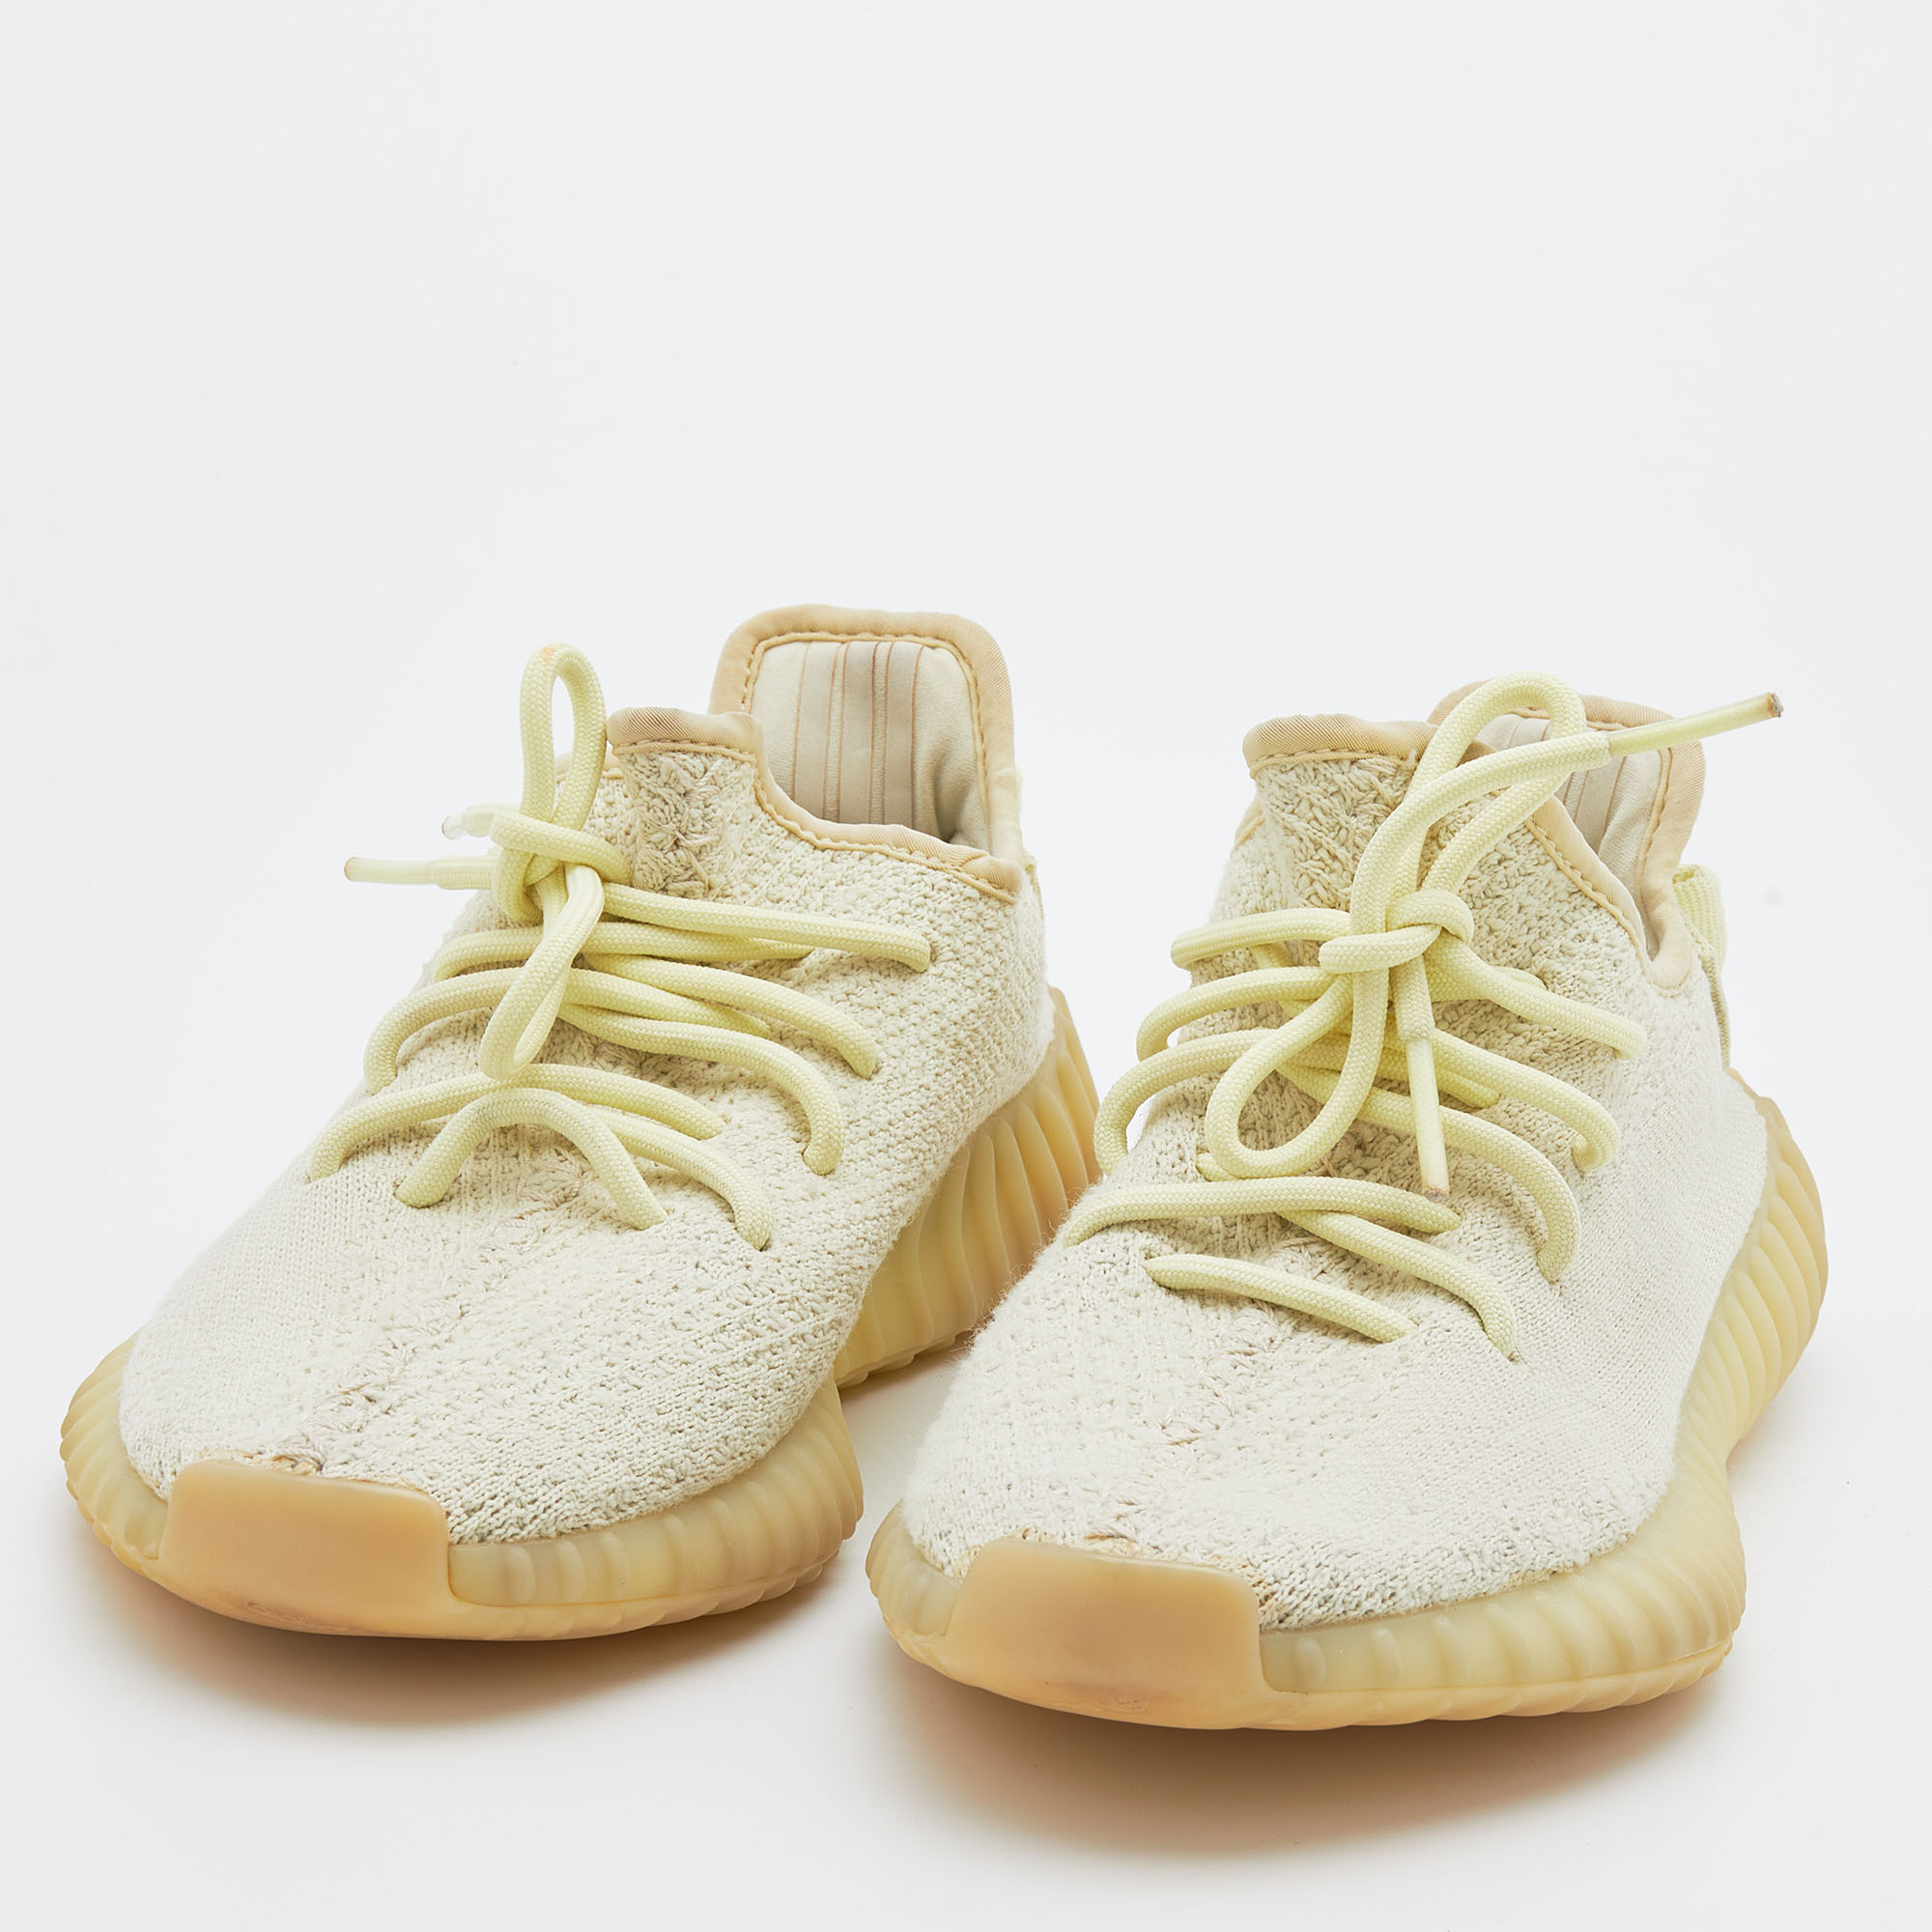 

Yeezy x Adidas Cream Knit Fabric Boost 350 V2 Butter Low Top Sneakers Size